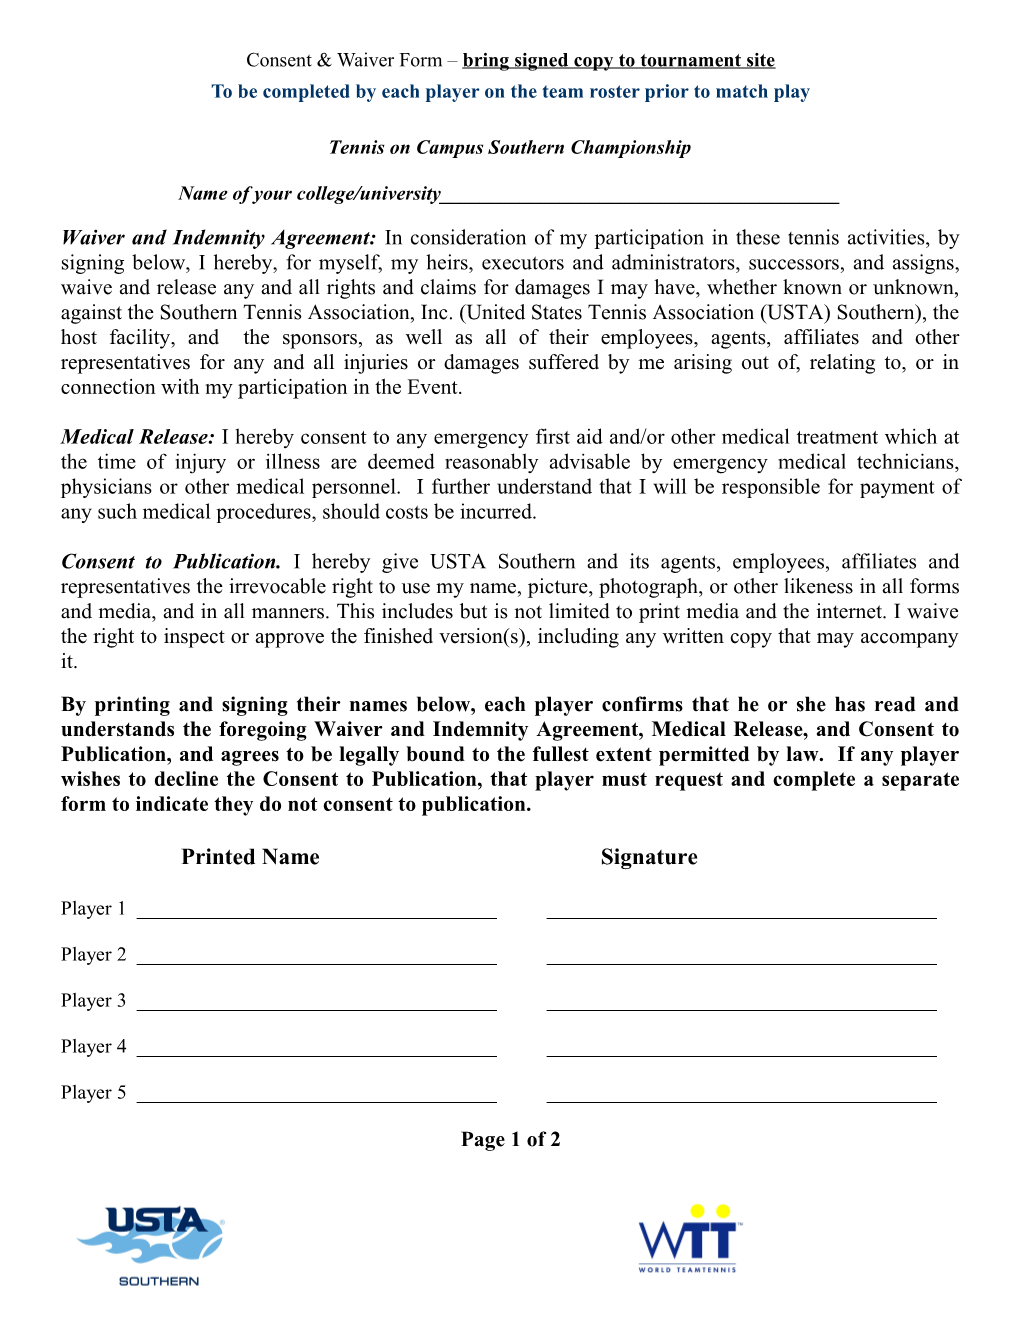 Consent & Waiver Form Bring Signed Copies to Tournament Site